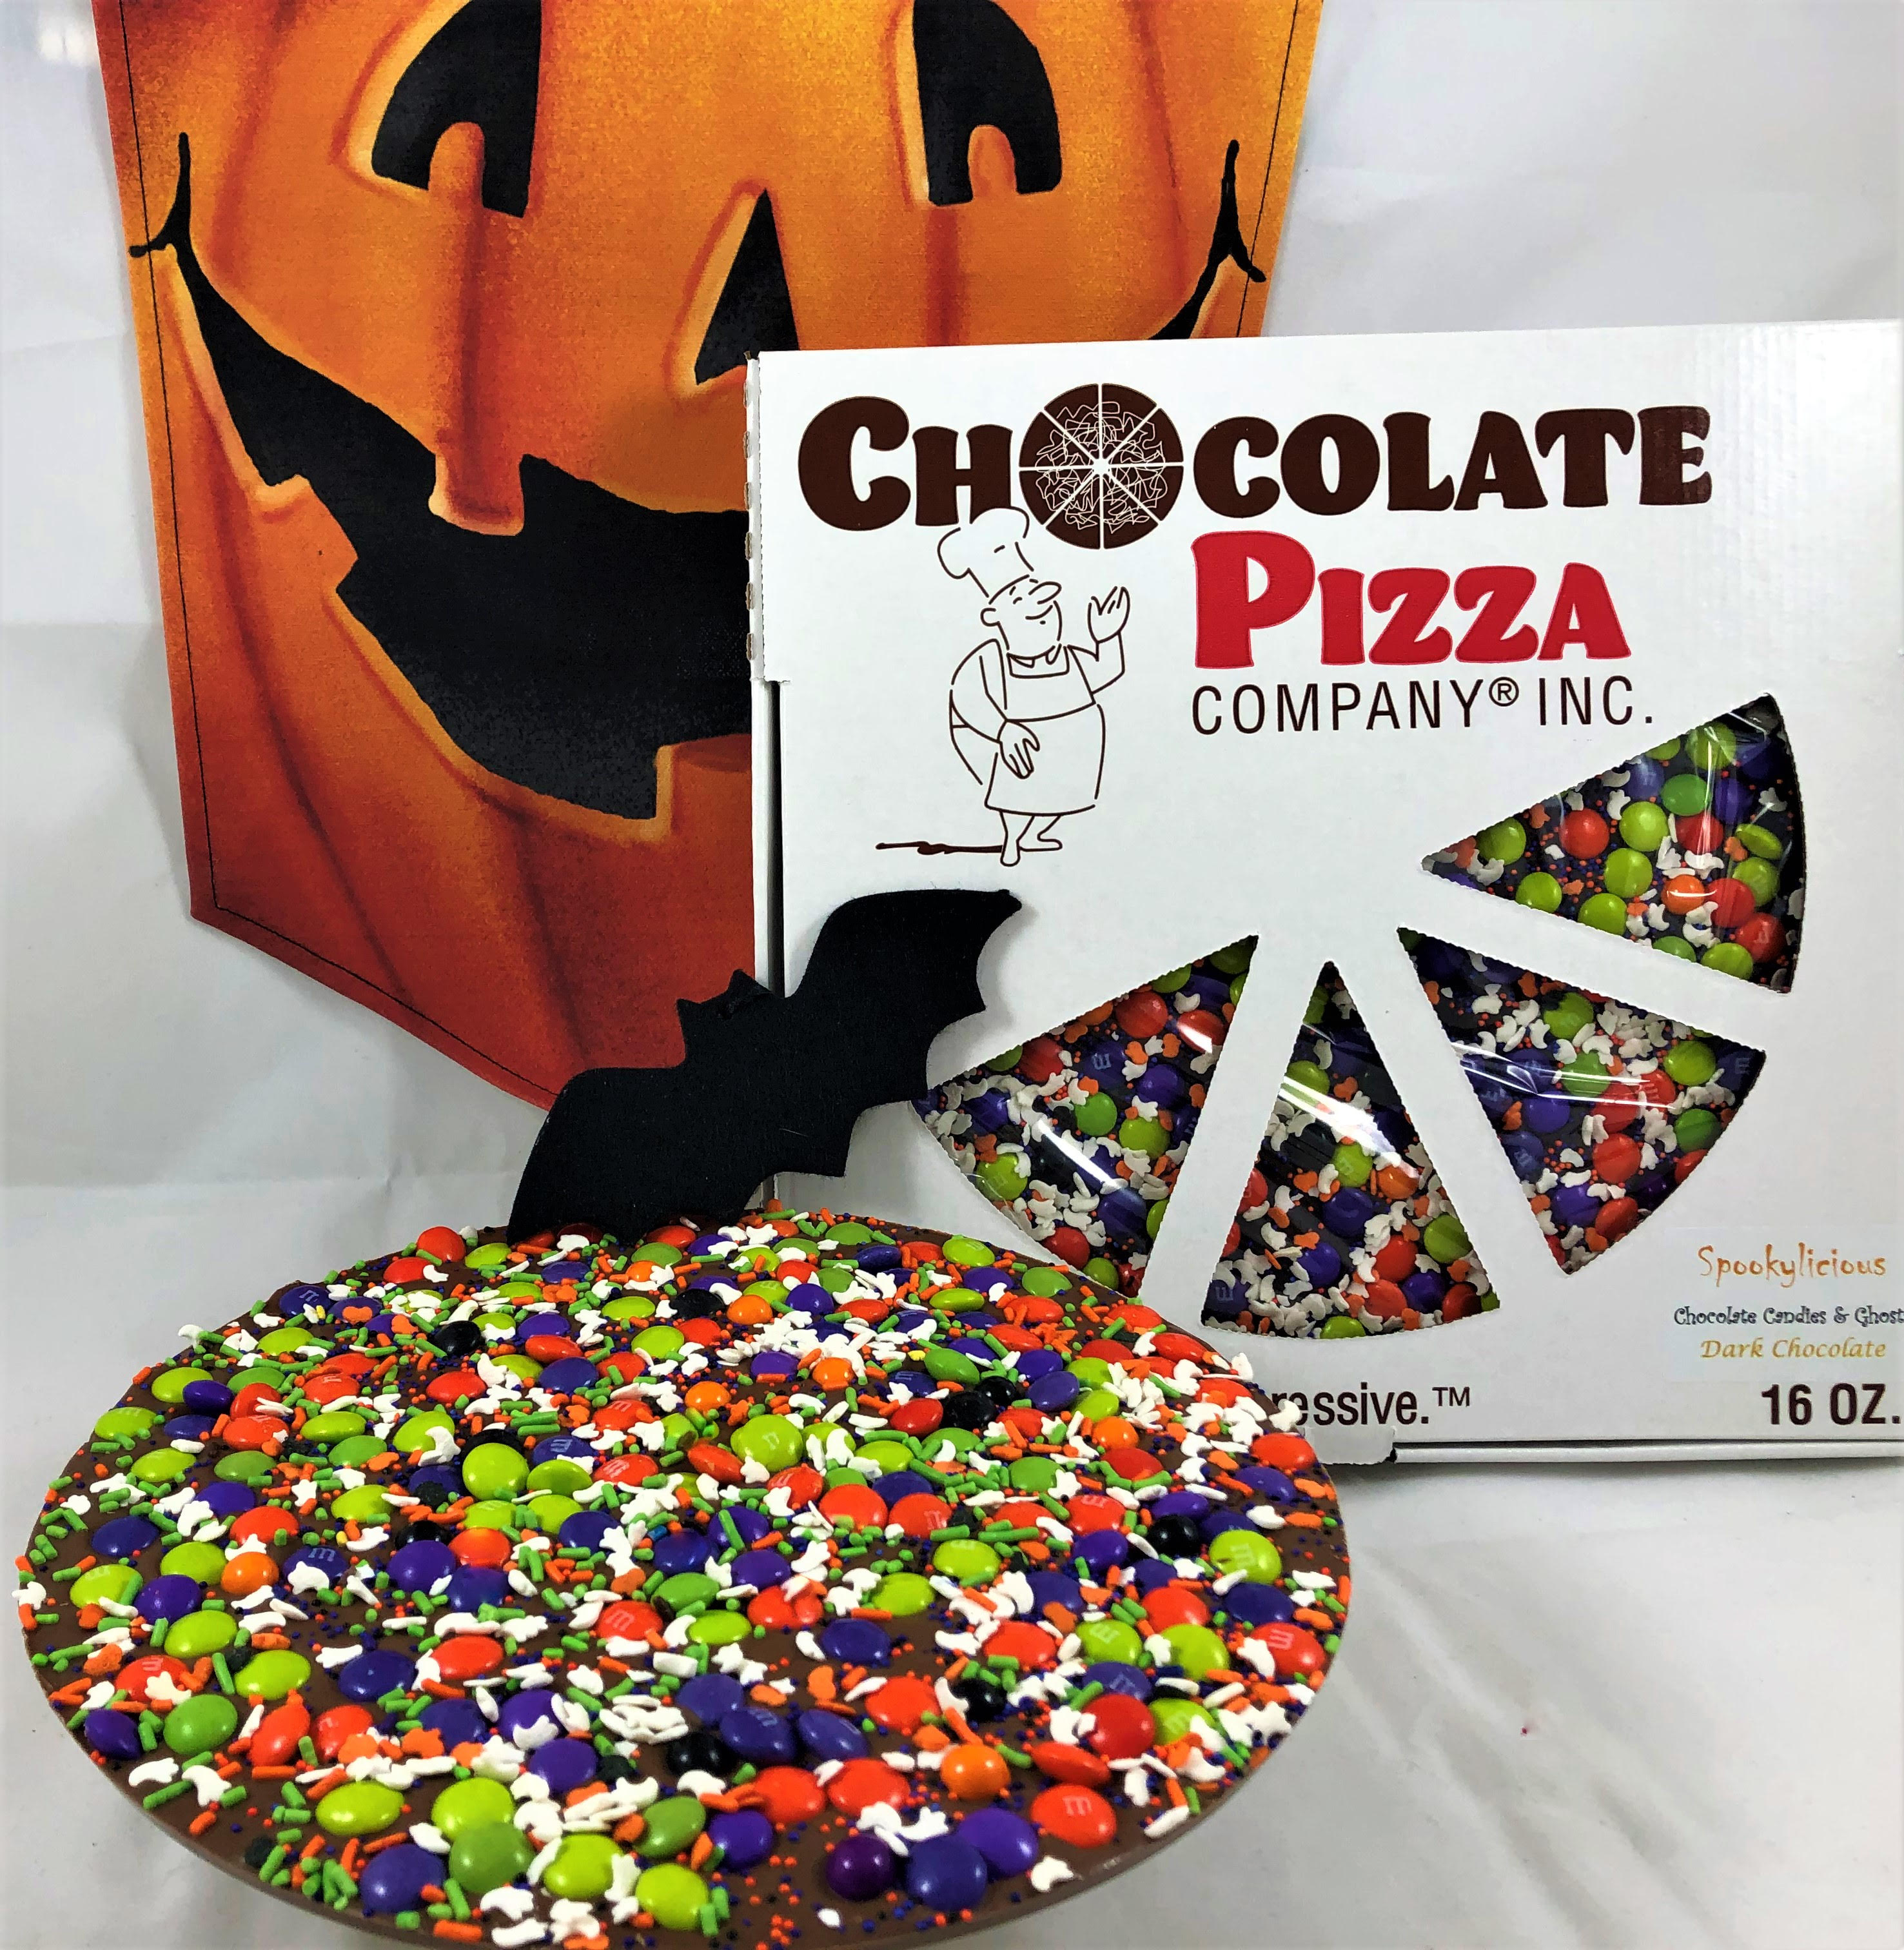 Spooky-licious Chocolate Pizza blends gourmet milk (or dark) chocolate with homemade English toffee. 